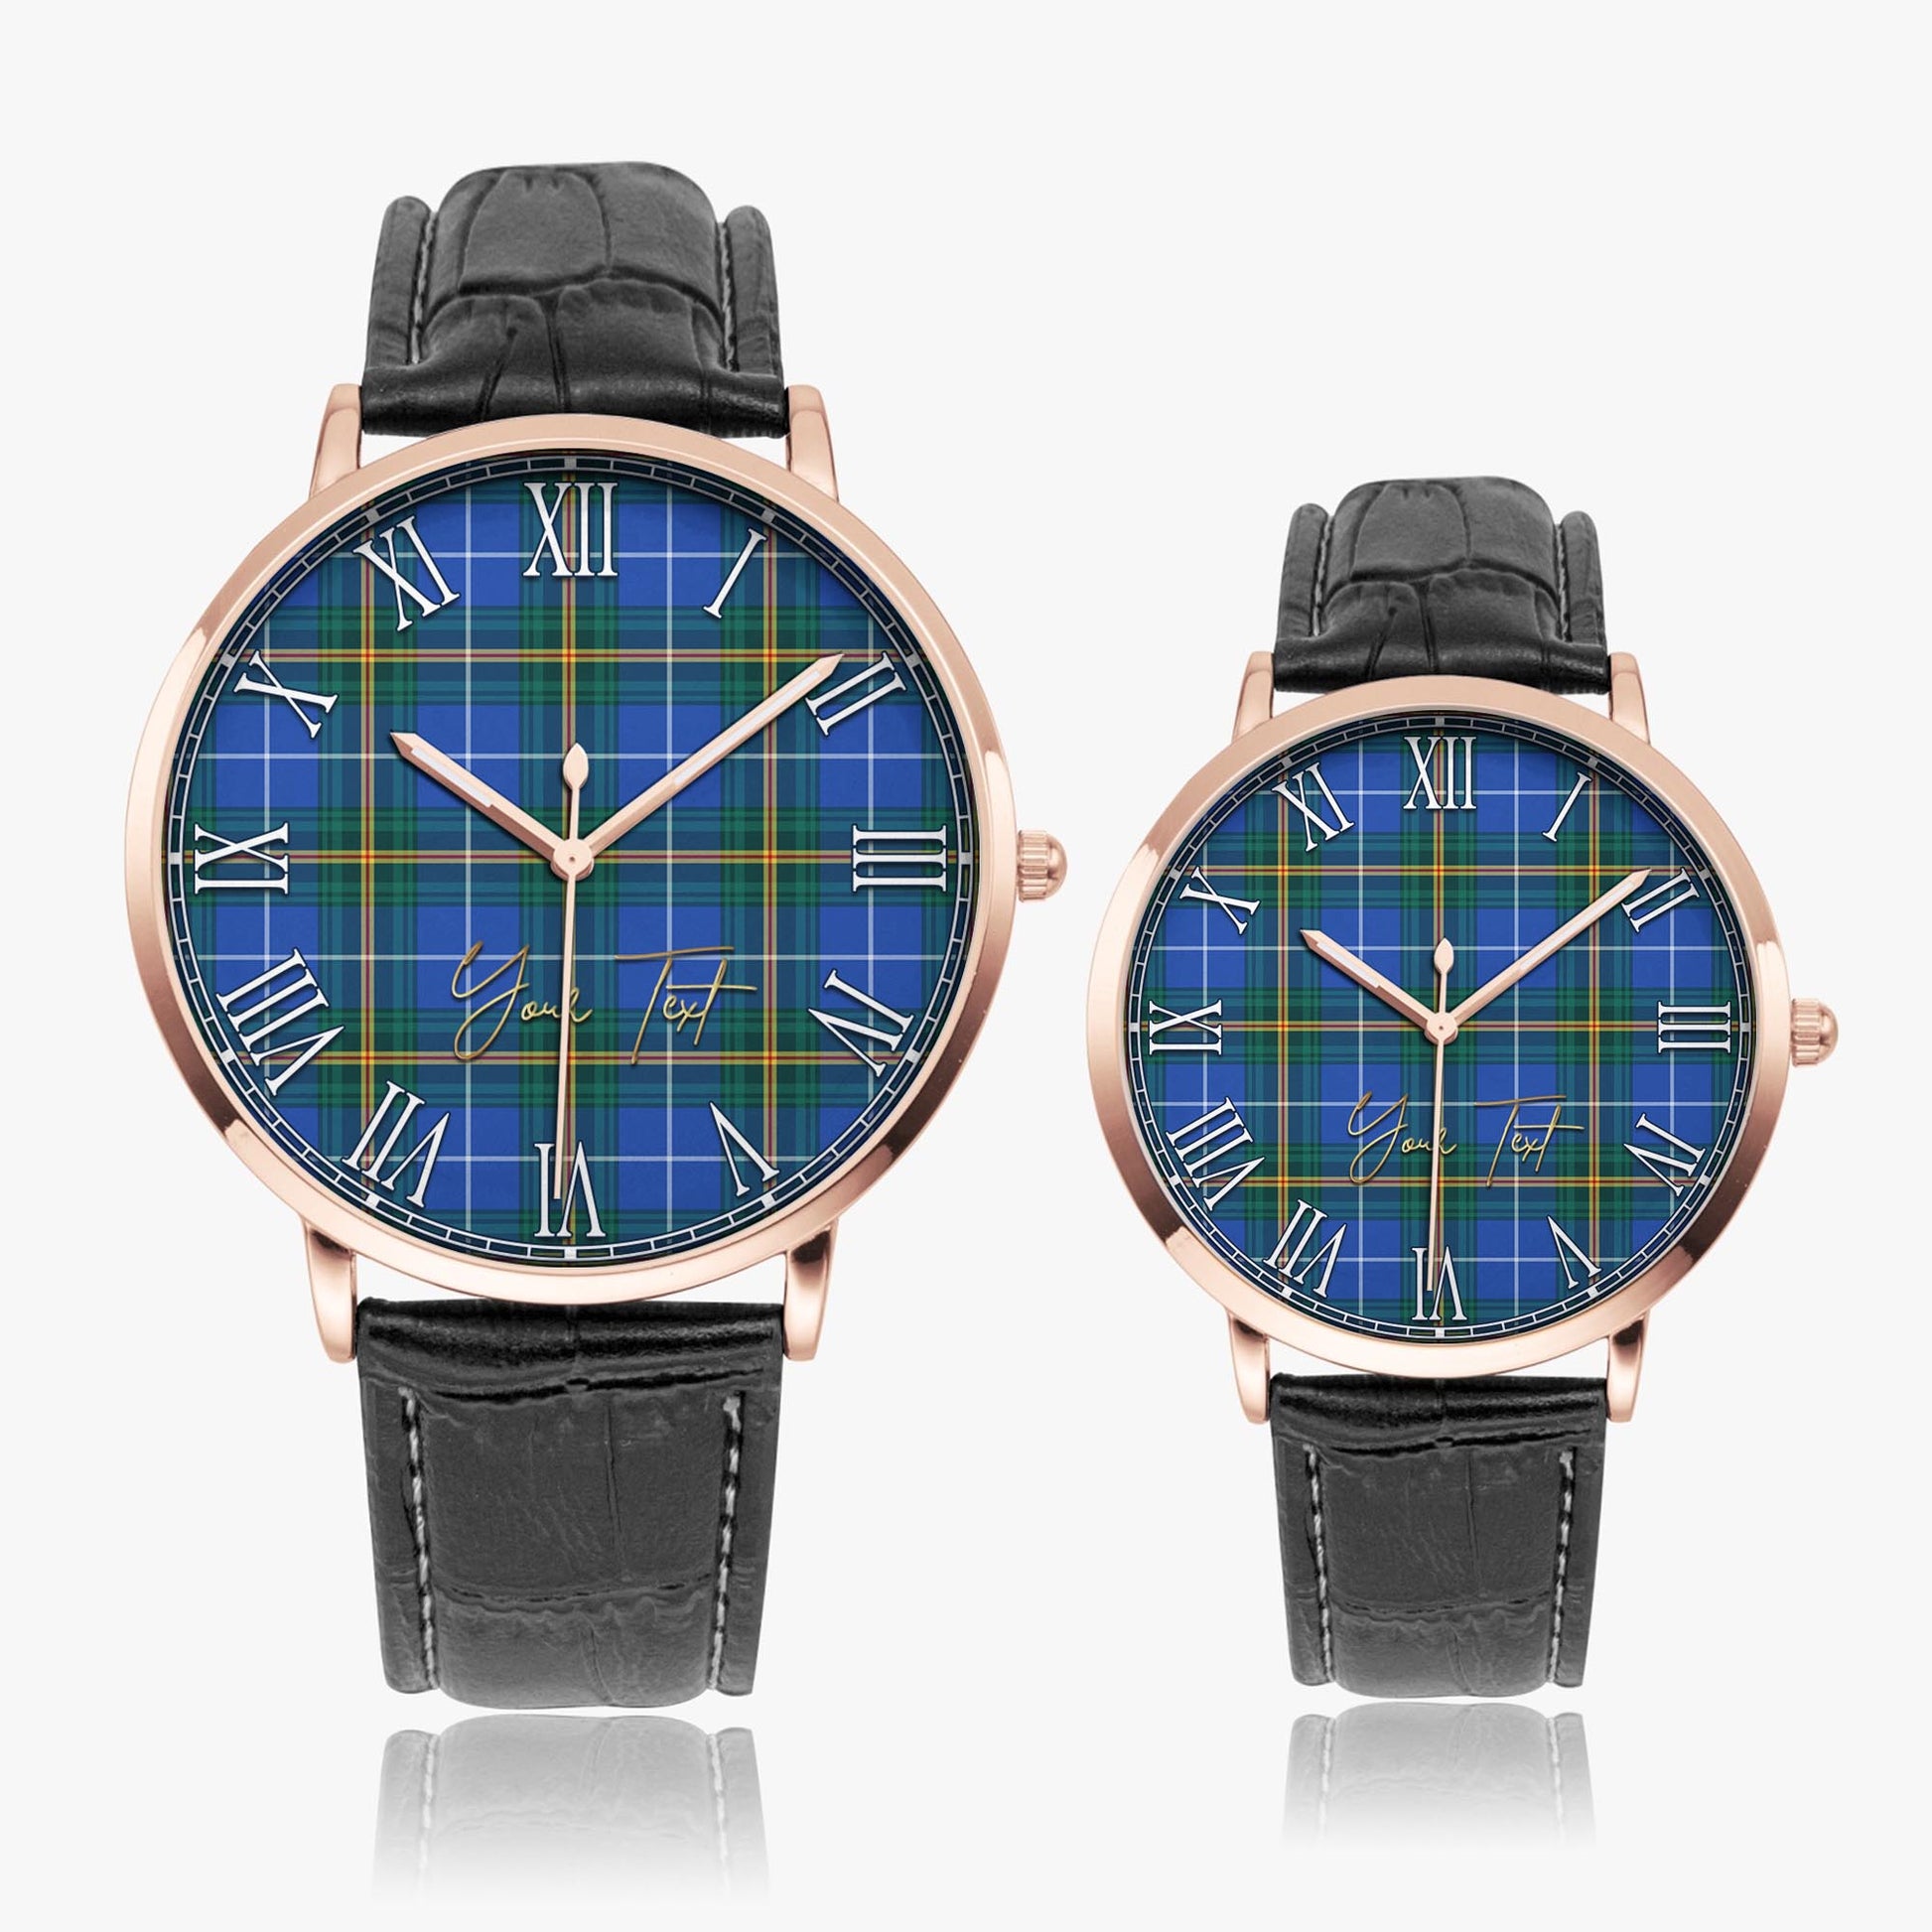 Nova Scotia Province Canada Tartan Personalized Your Text Leather Trap Quartz Watch Ultra Thin Rose Gold Case With Black Leather Strap - Tartanvibesclothing